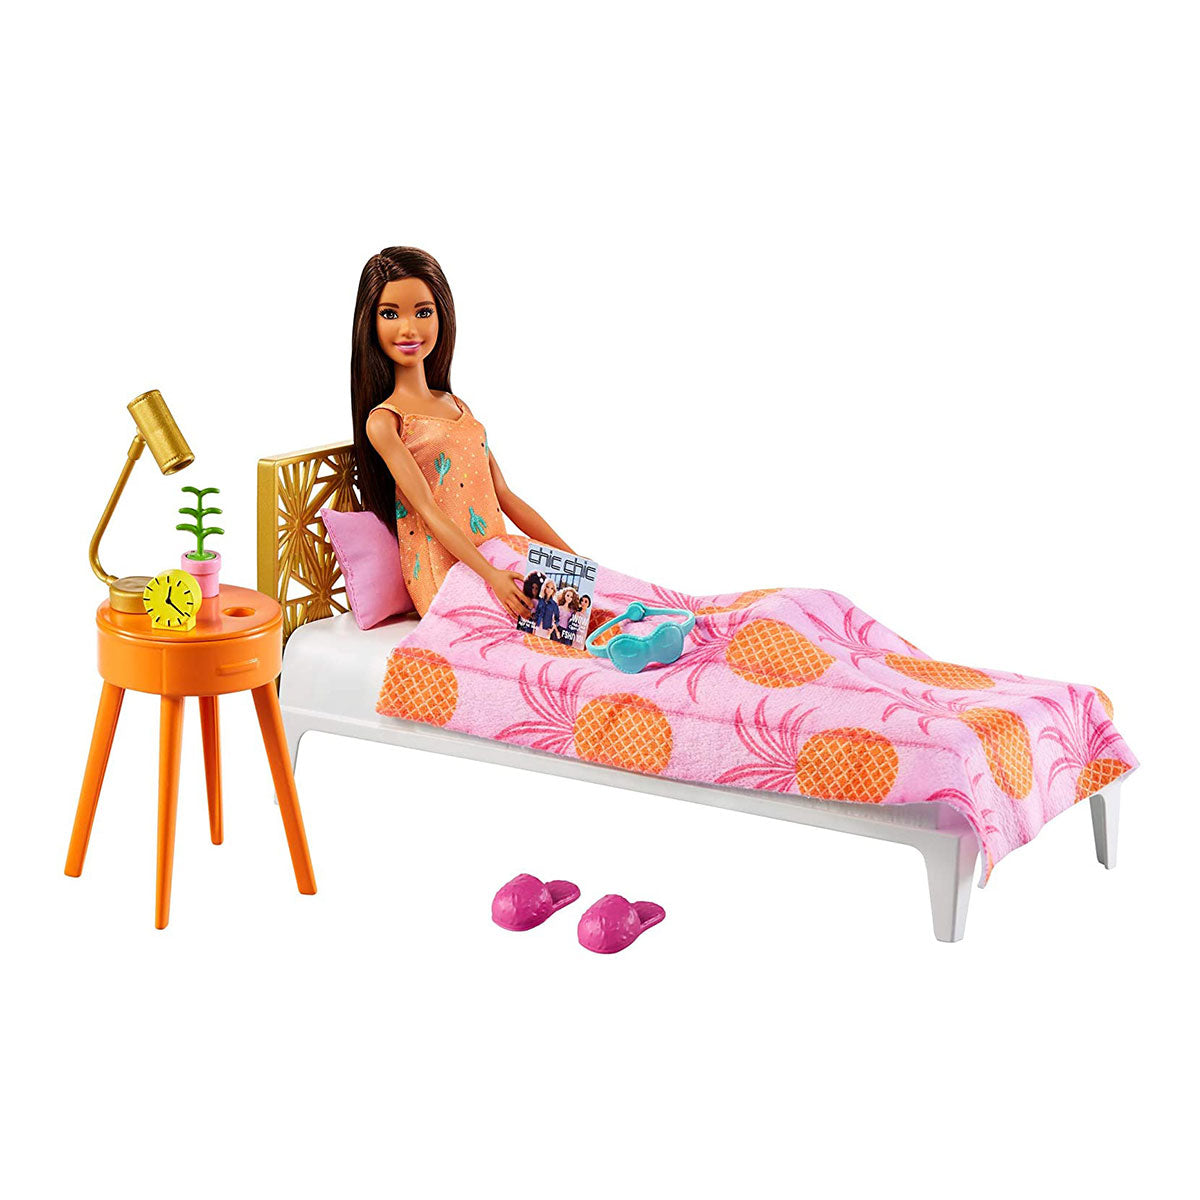 Barbie - Doll and Bedroom Playset